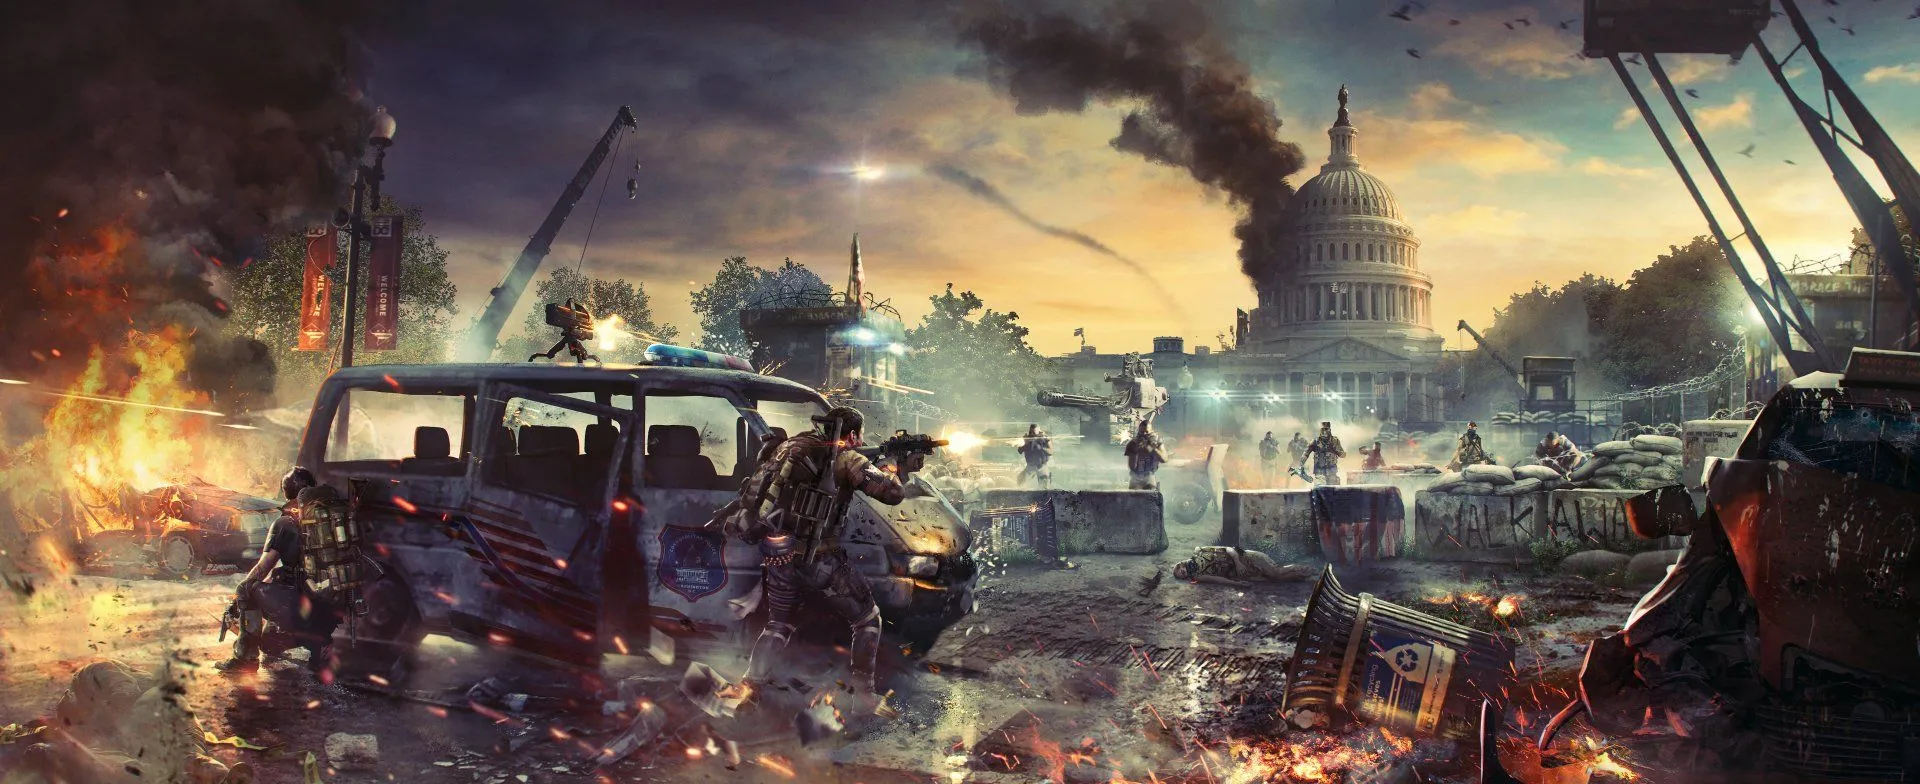 The Division 2 Backgrounds